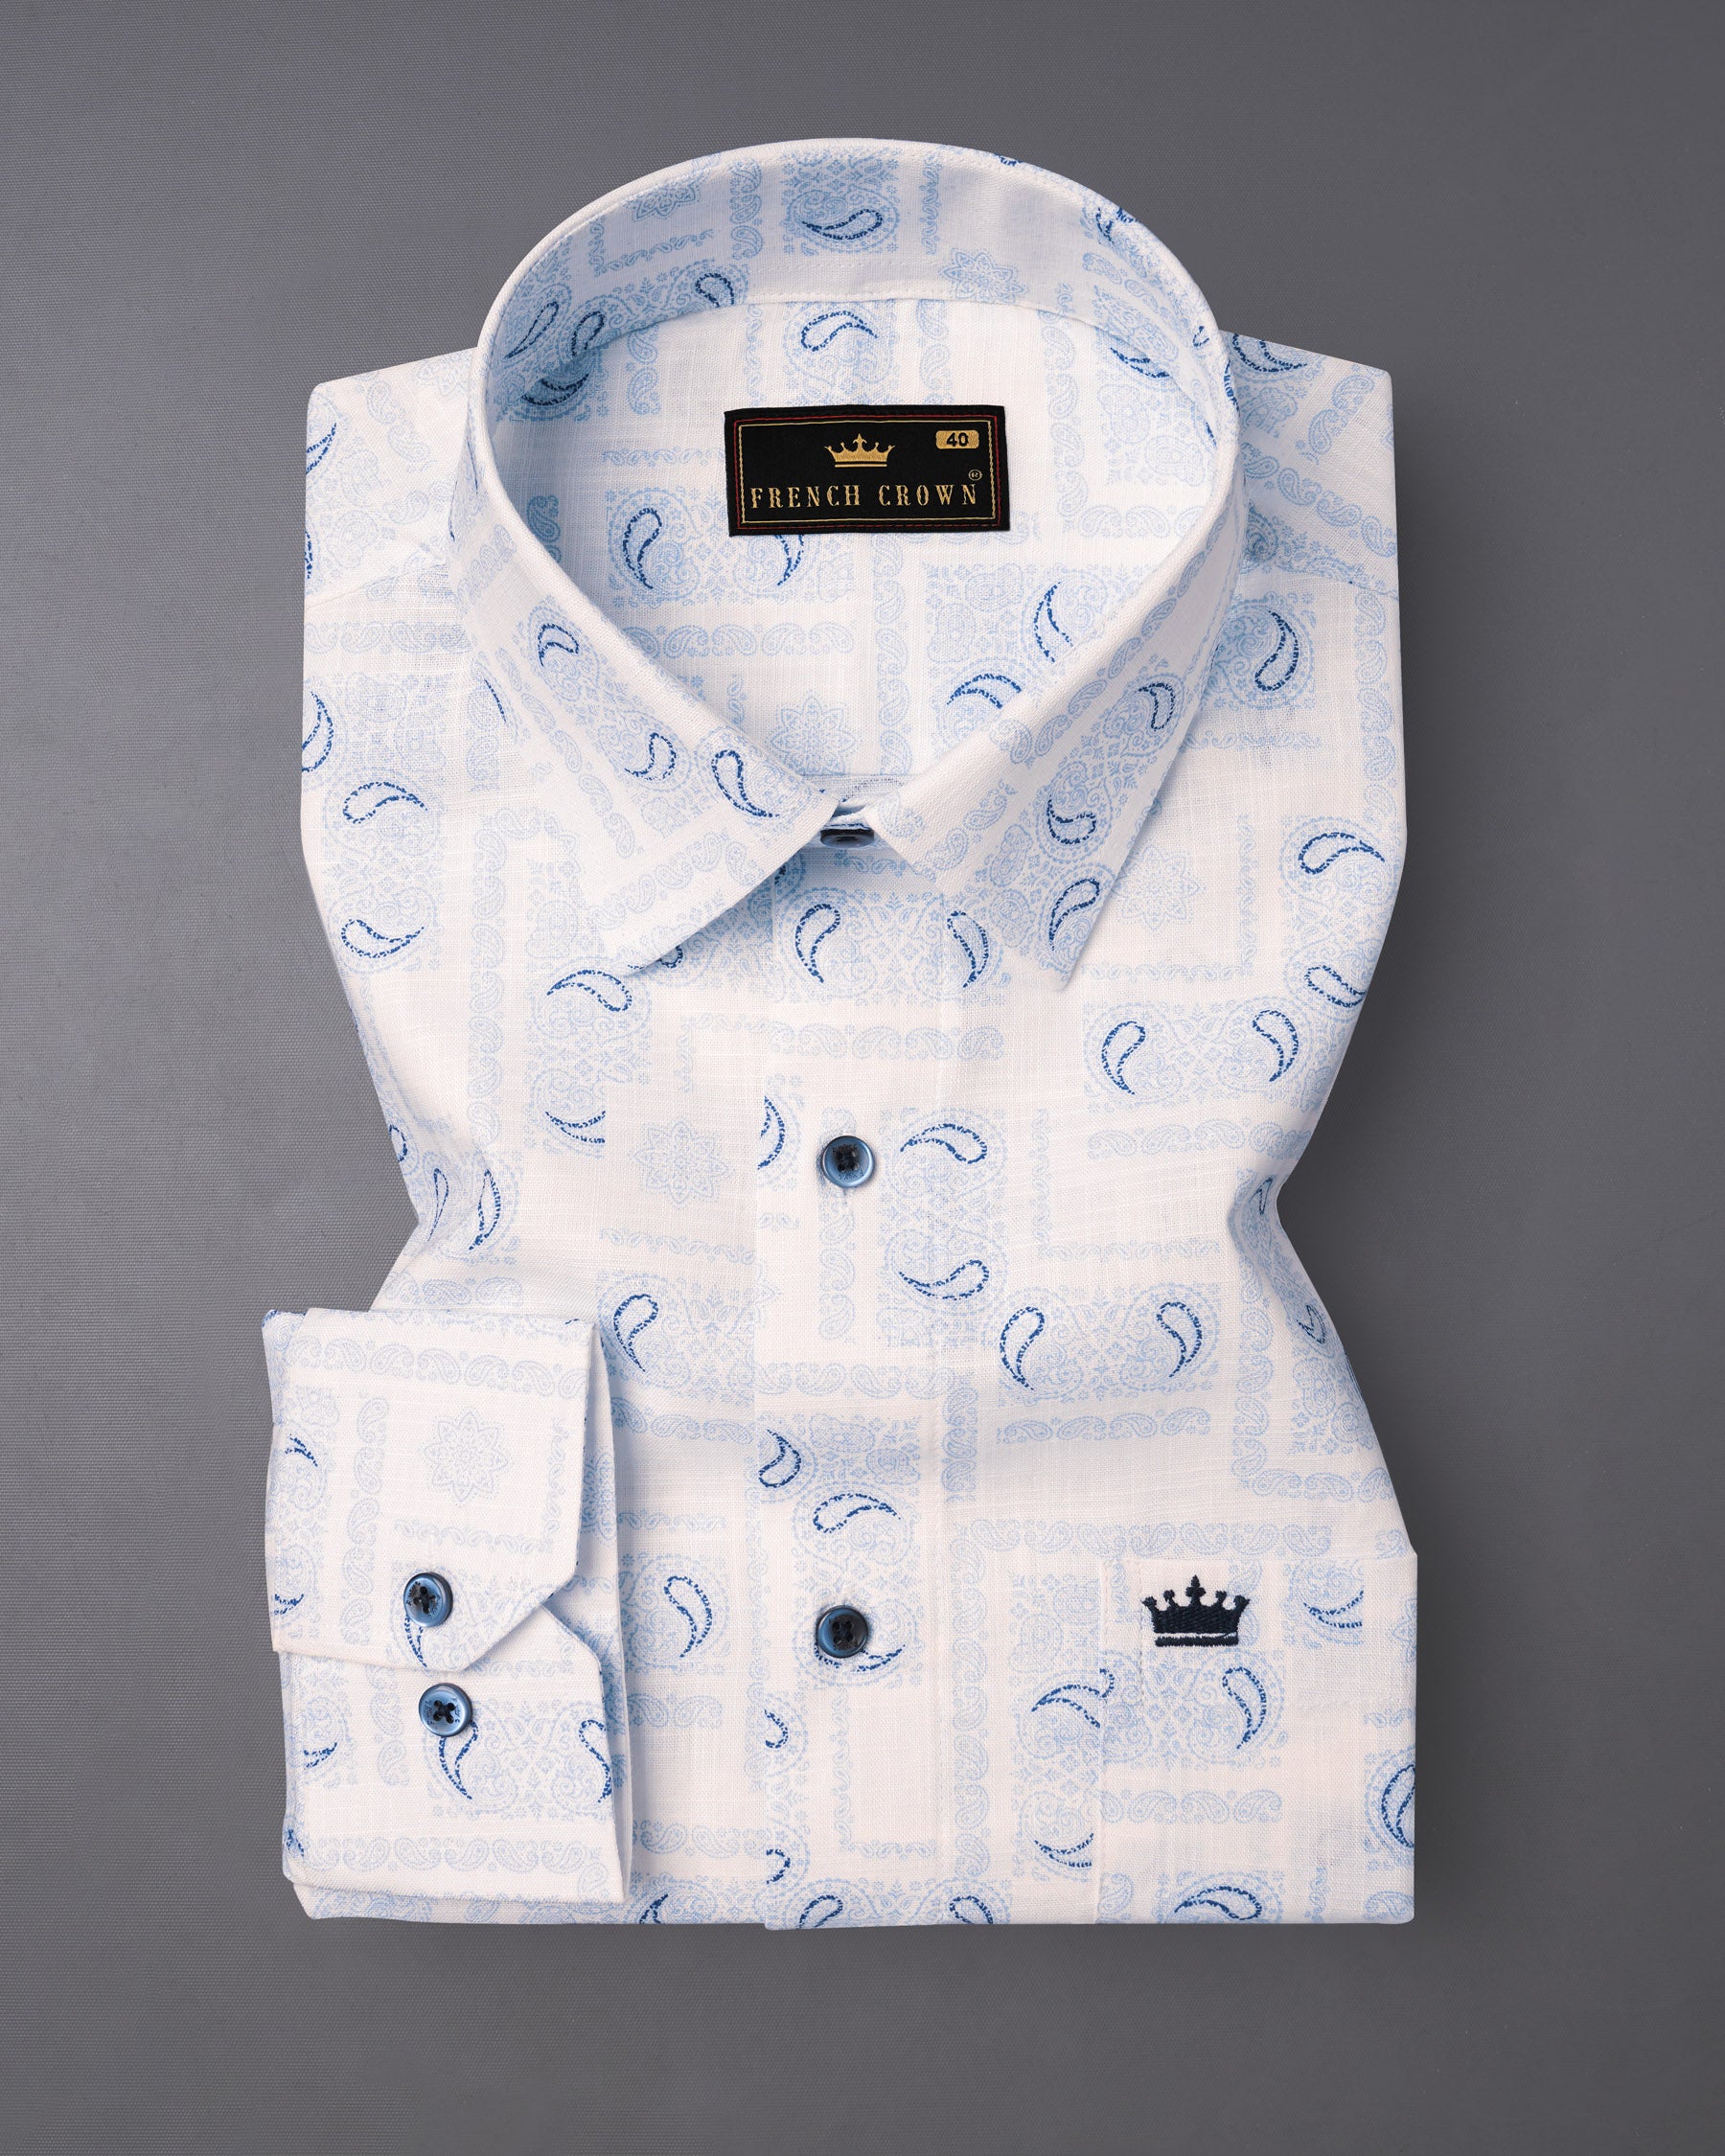 Bright White and Cobalt Paisley Formal/Casual Prints Premium Linen